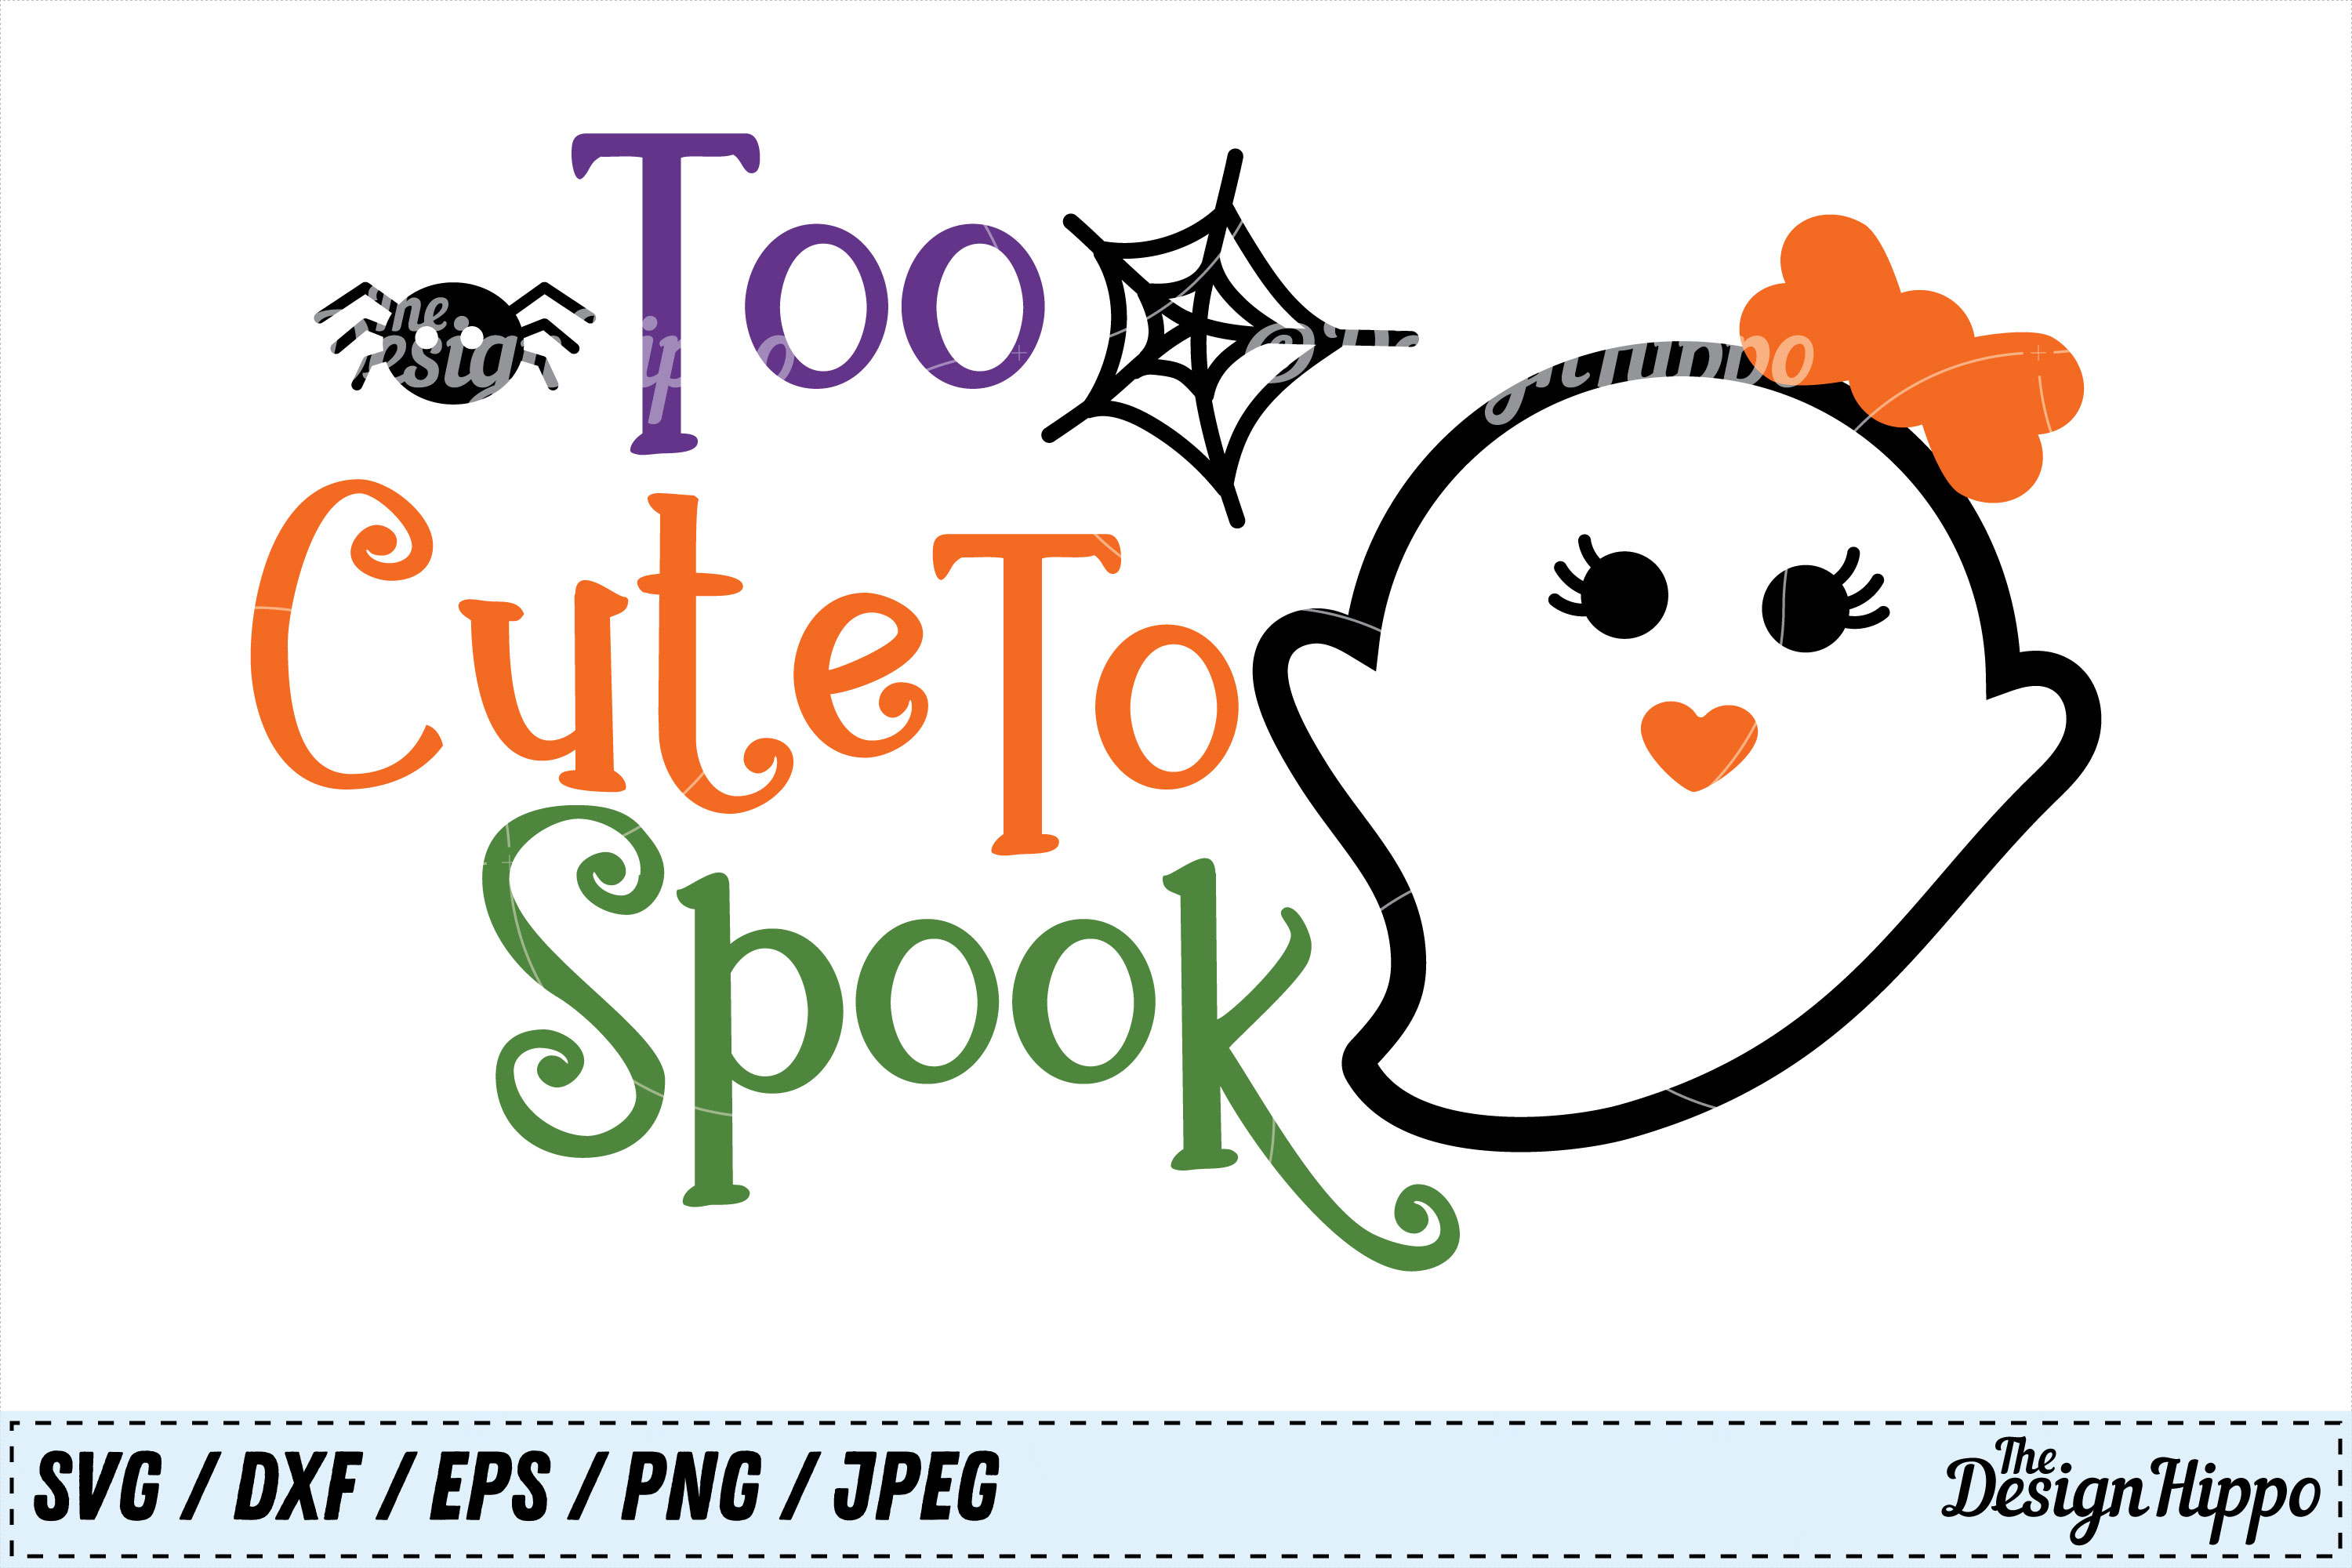 Too Cute To Spook SVG, Halloween SVG, Cute Halloween SVG PNG (130881